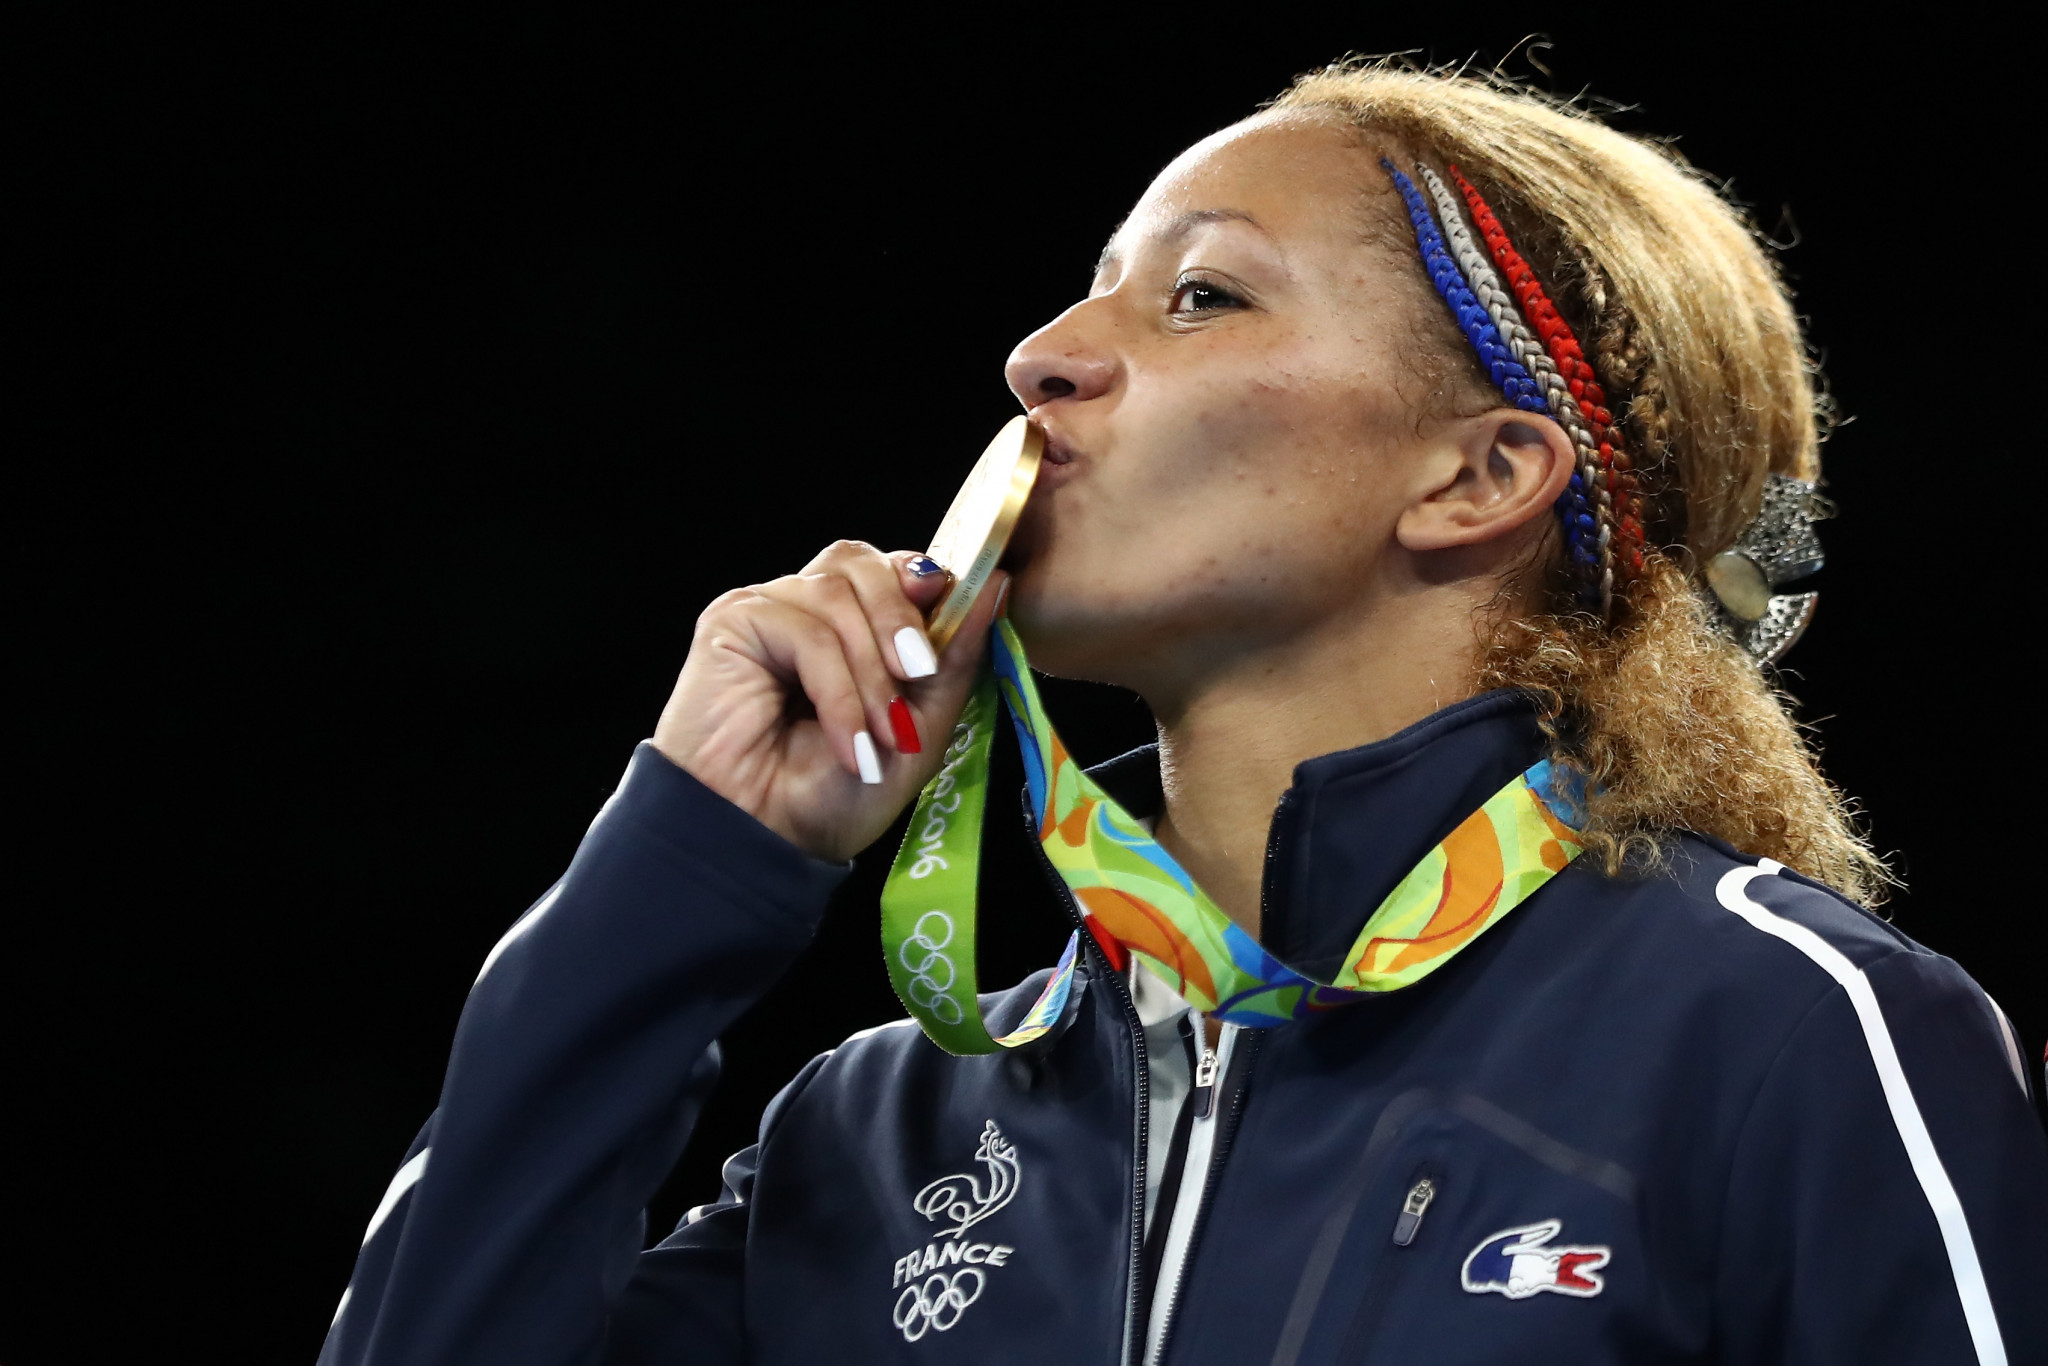 Rio 2016 gold medallist Mossely to be guest at International Boxing Day celebration in DR Congo